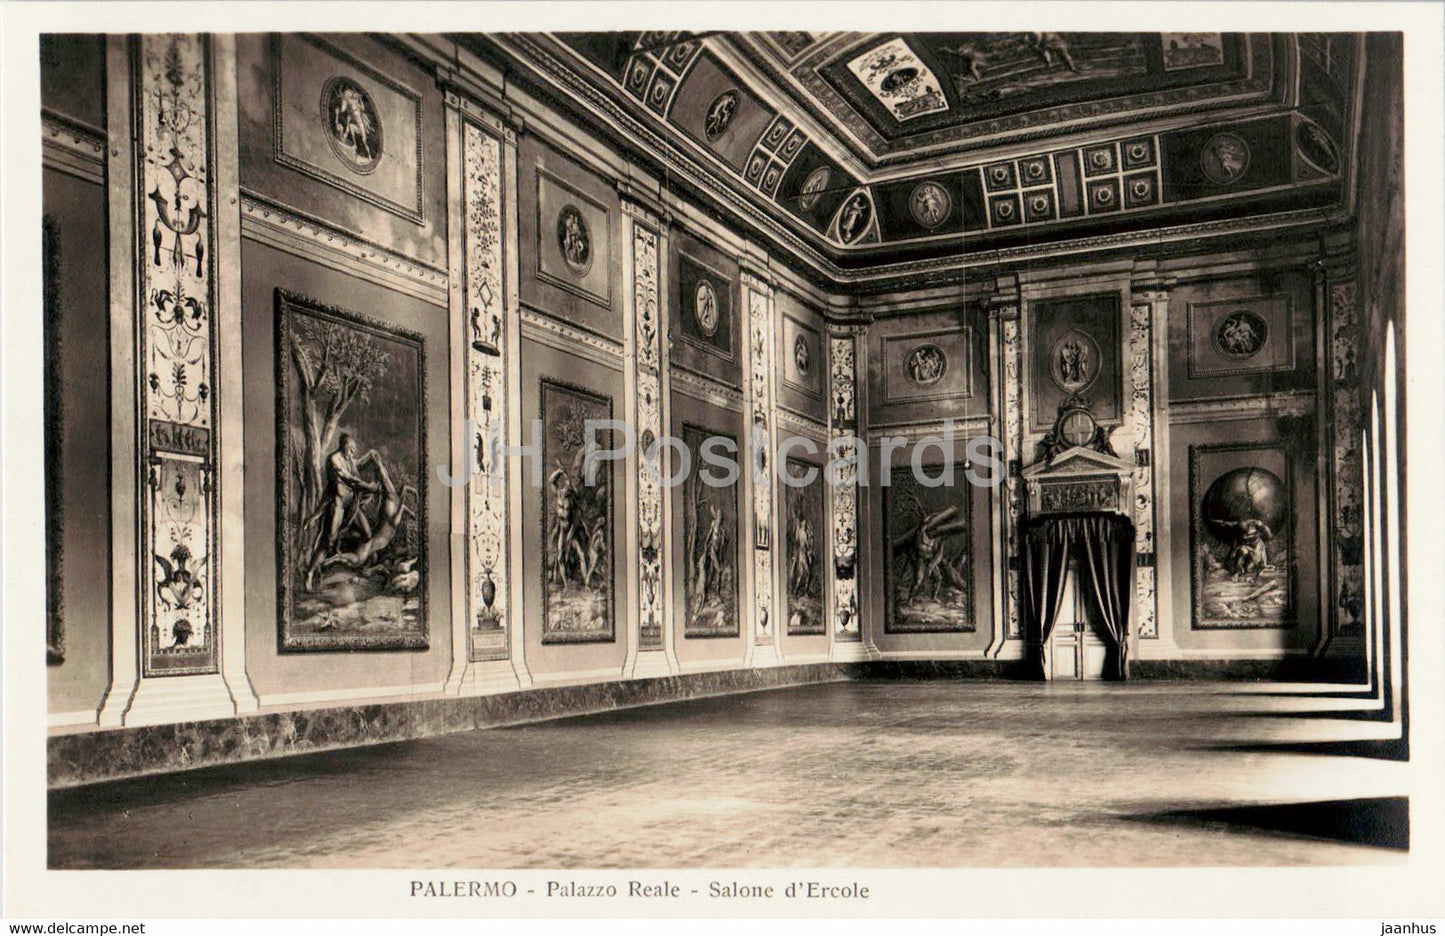 Palermo - Palazzo Reale - Salone d'Ercole - old postcard - Italy - unused - JH Postcards